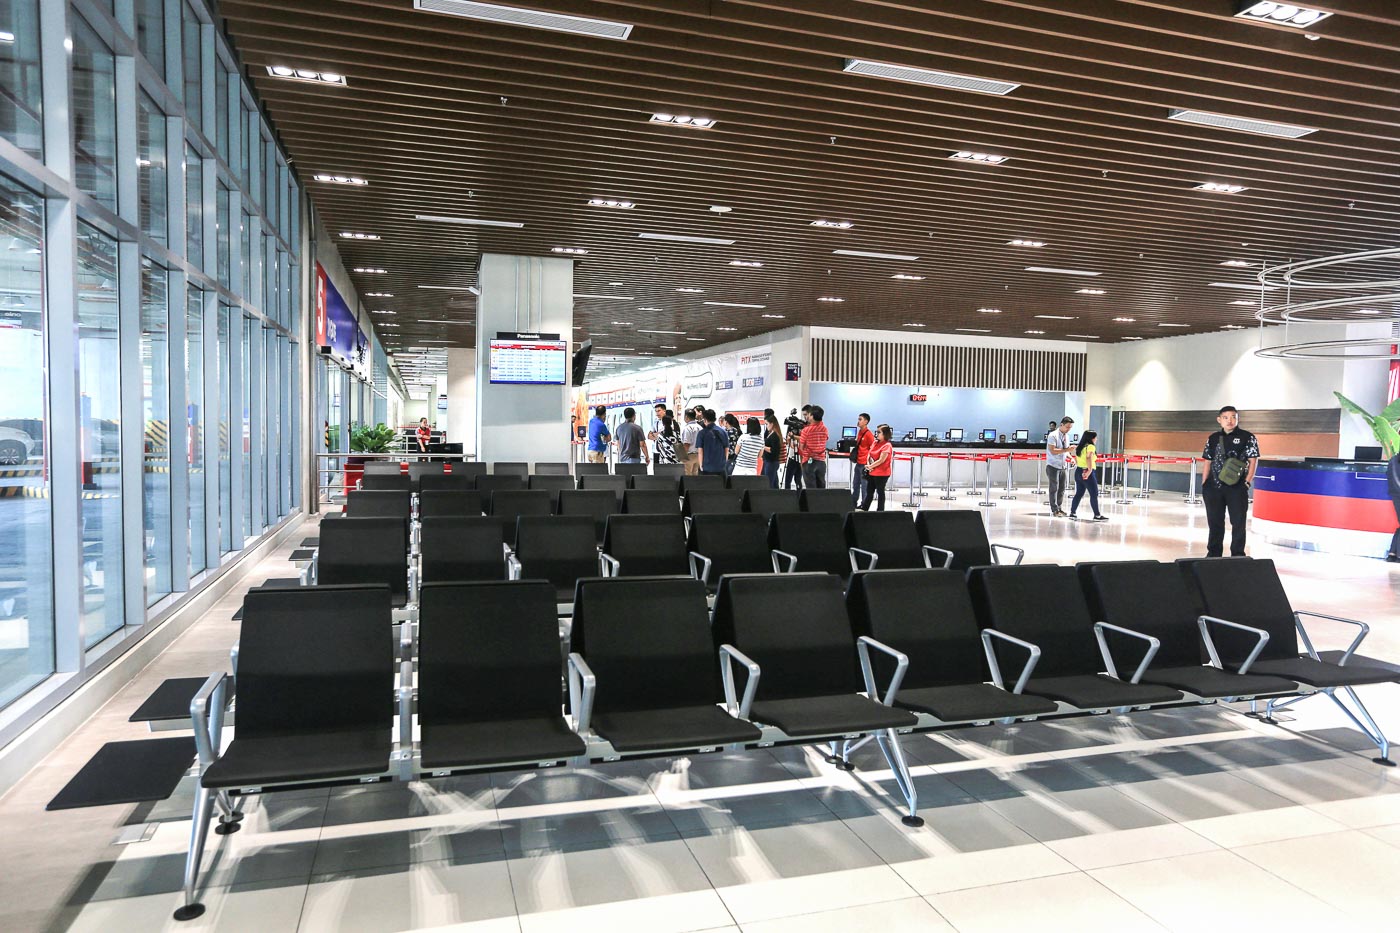 WAITING AREA. Comfortable seats for passengers waiting for their ride. Photo by Ben Nabong/Rappler 